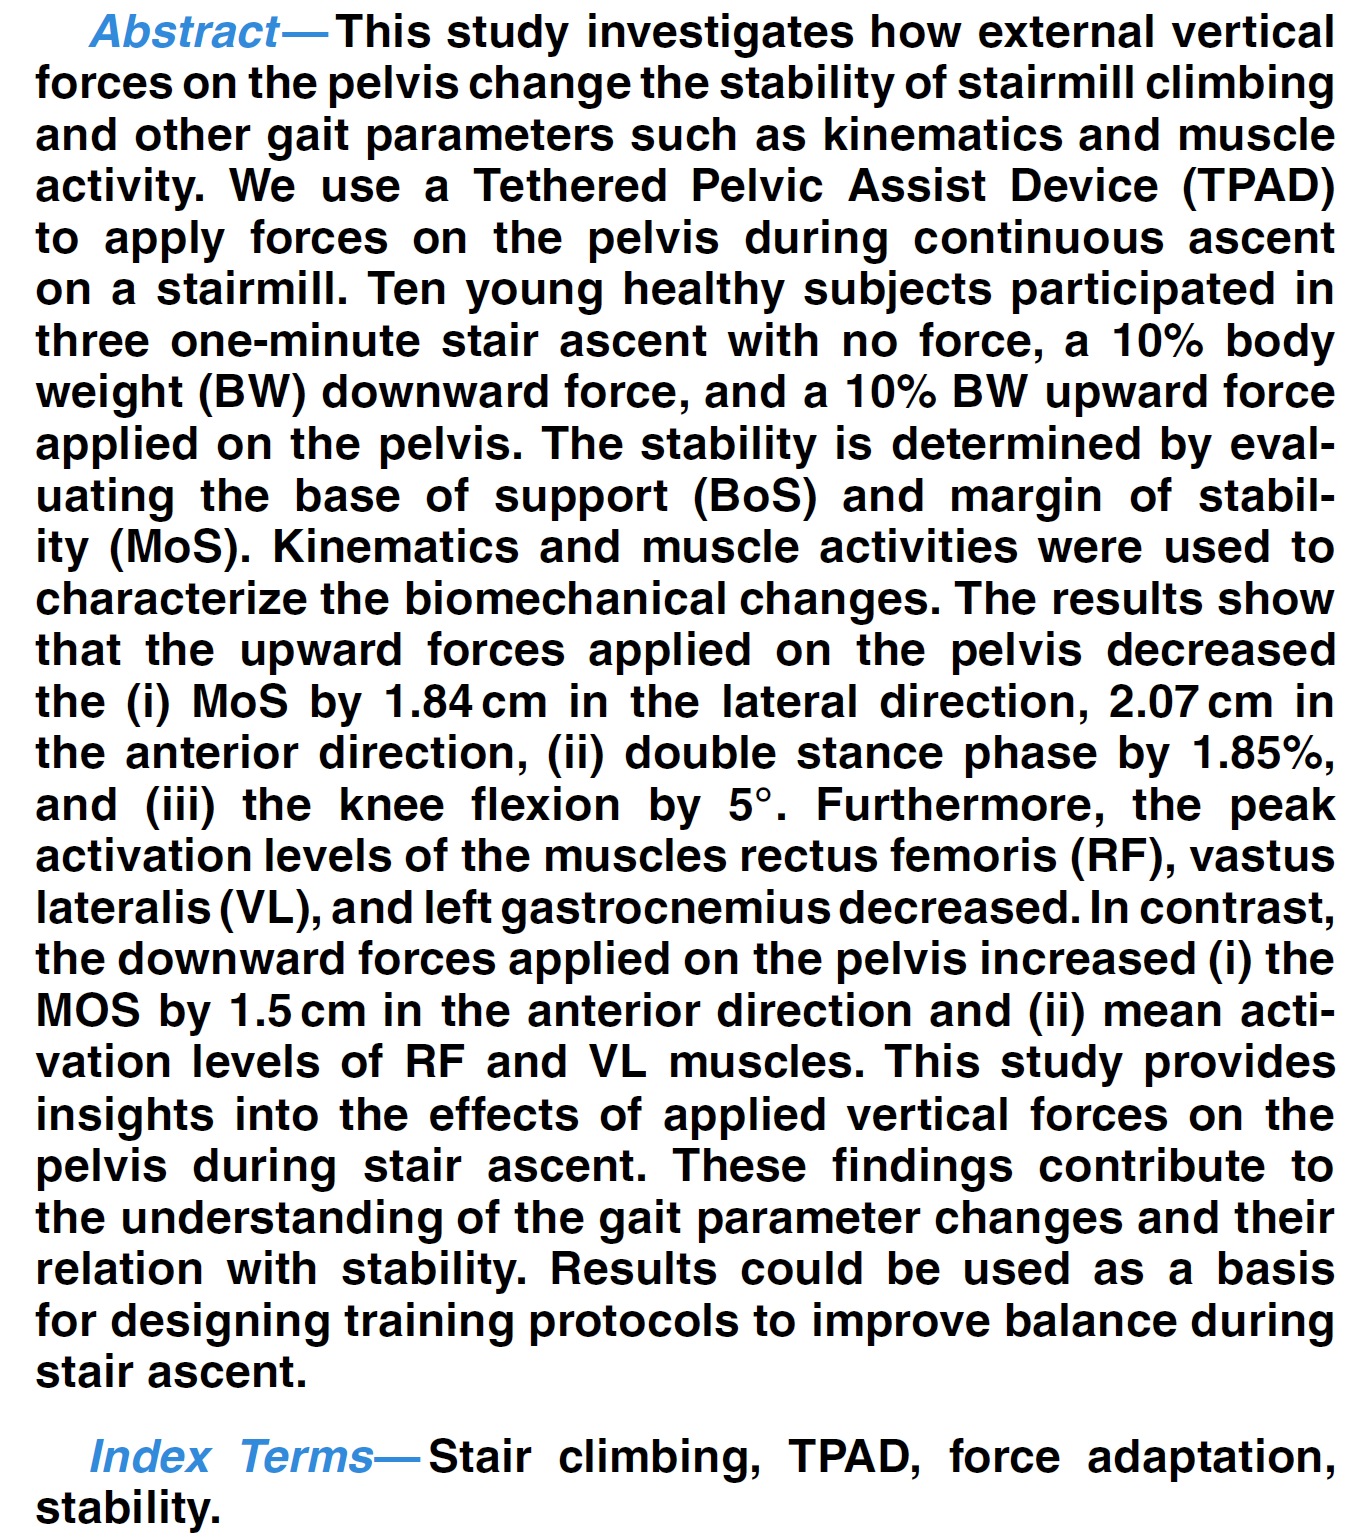 a robotic platform help to investigate how external vertical forces on the pelvis change the stability of stairmill climbing.